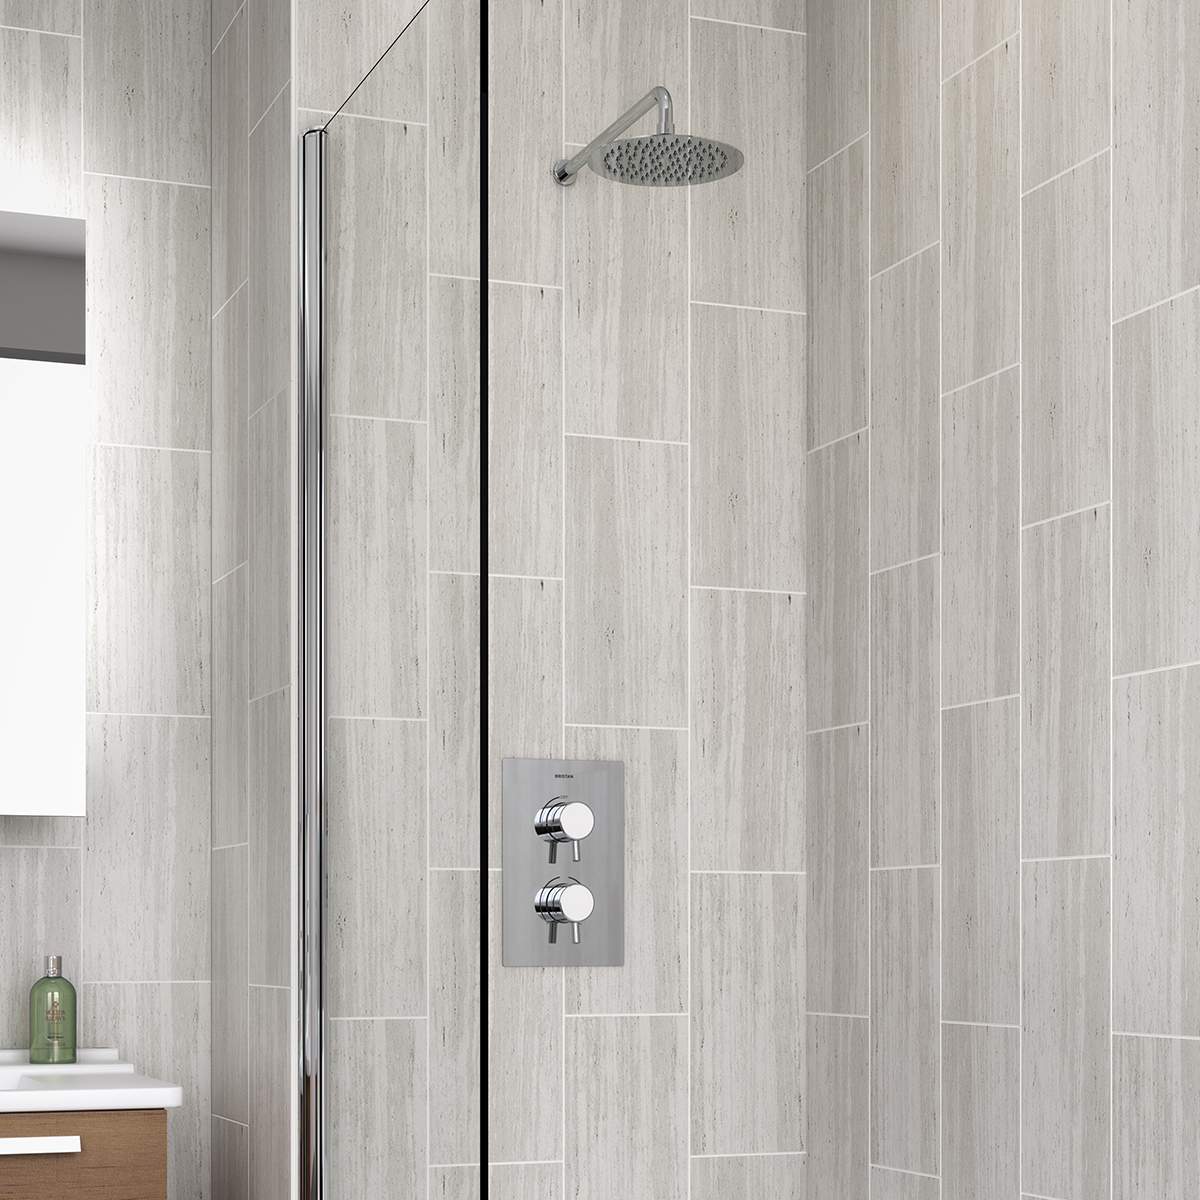 Bristan Prism Recessed Concealed Dual Control Bath and Shower Pack (PRISM SHWR PK)